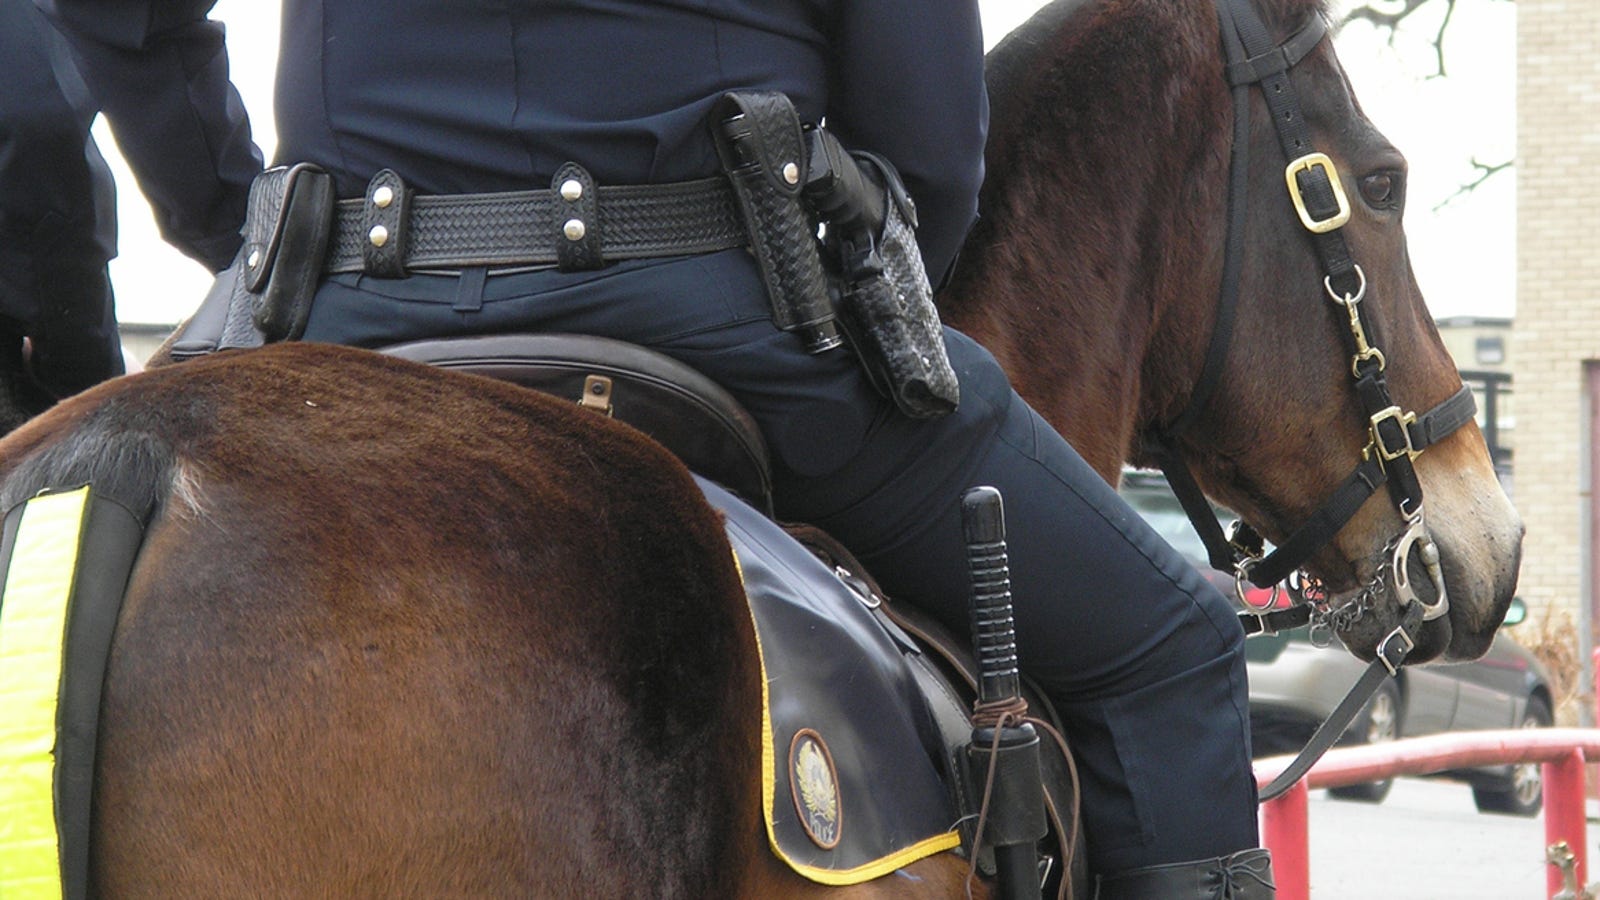 Black Man Walked on Rope by Mounted Police Has Mental Illness, According to Family